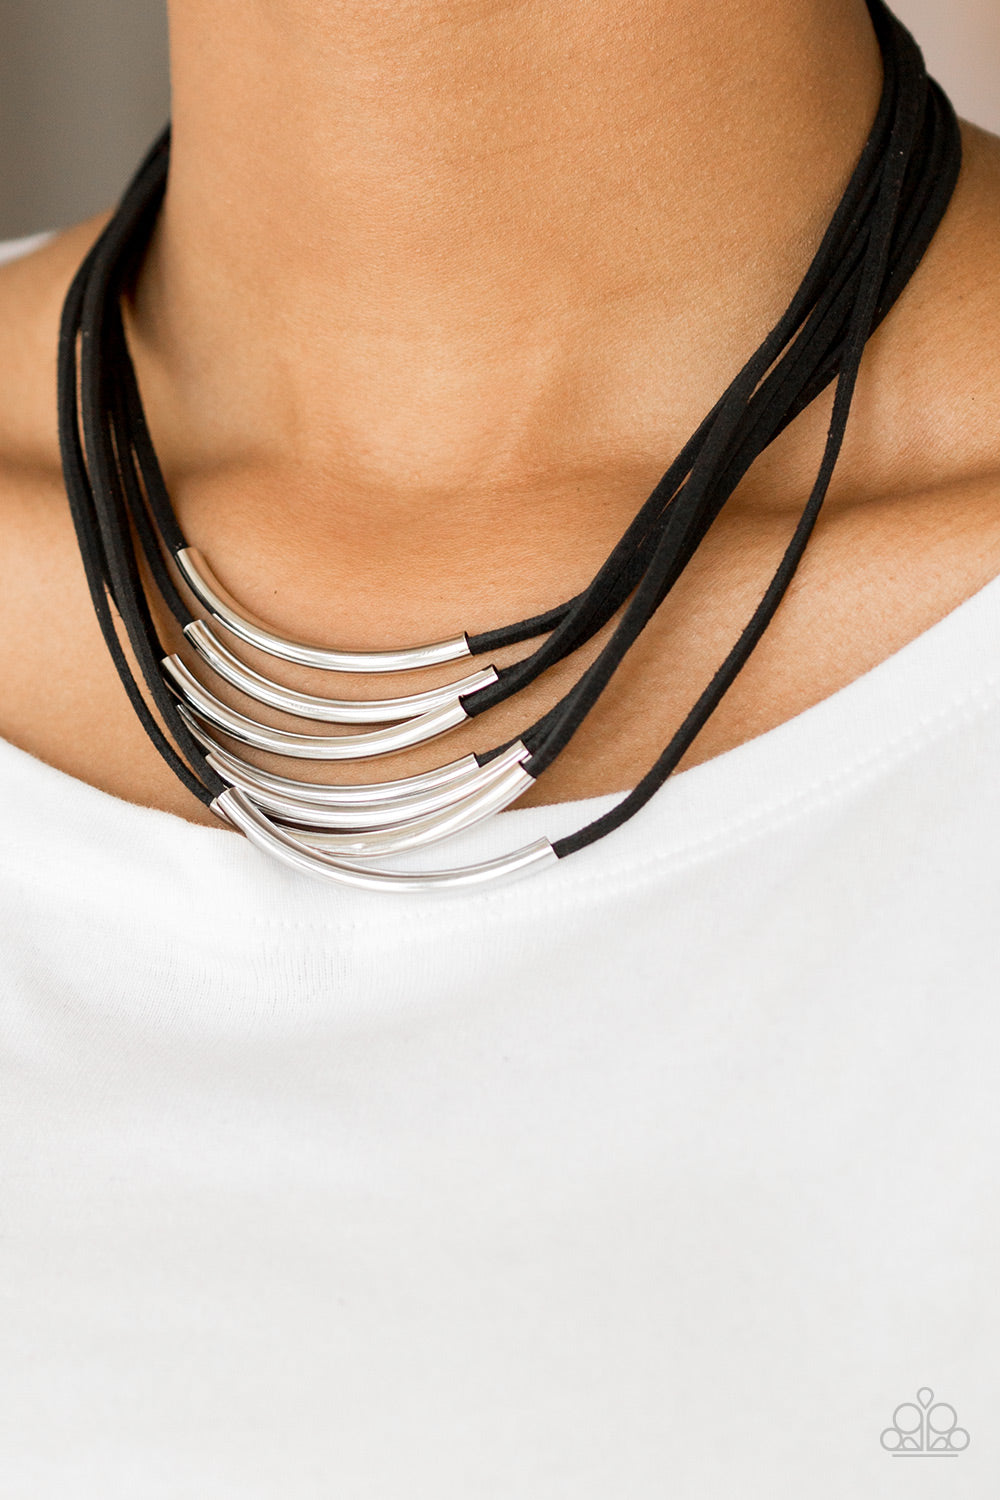 Walk The WALKABOUT Black Necklace - Paparazzi Accessories